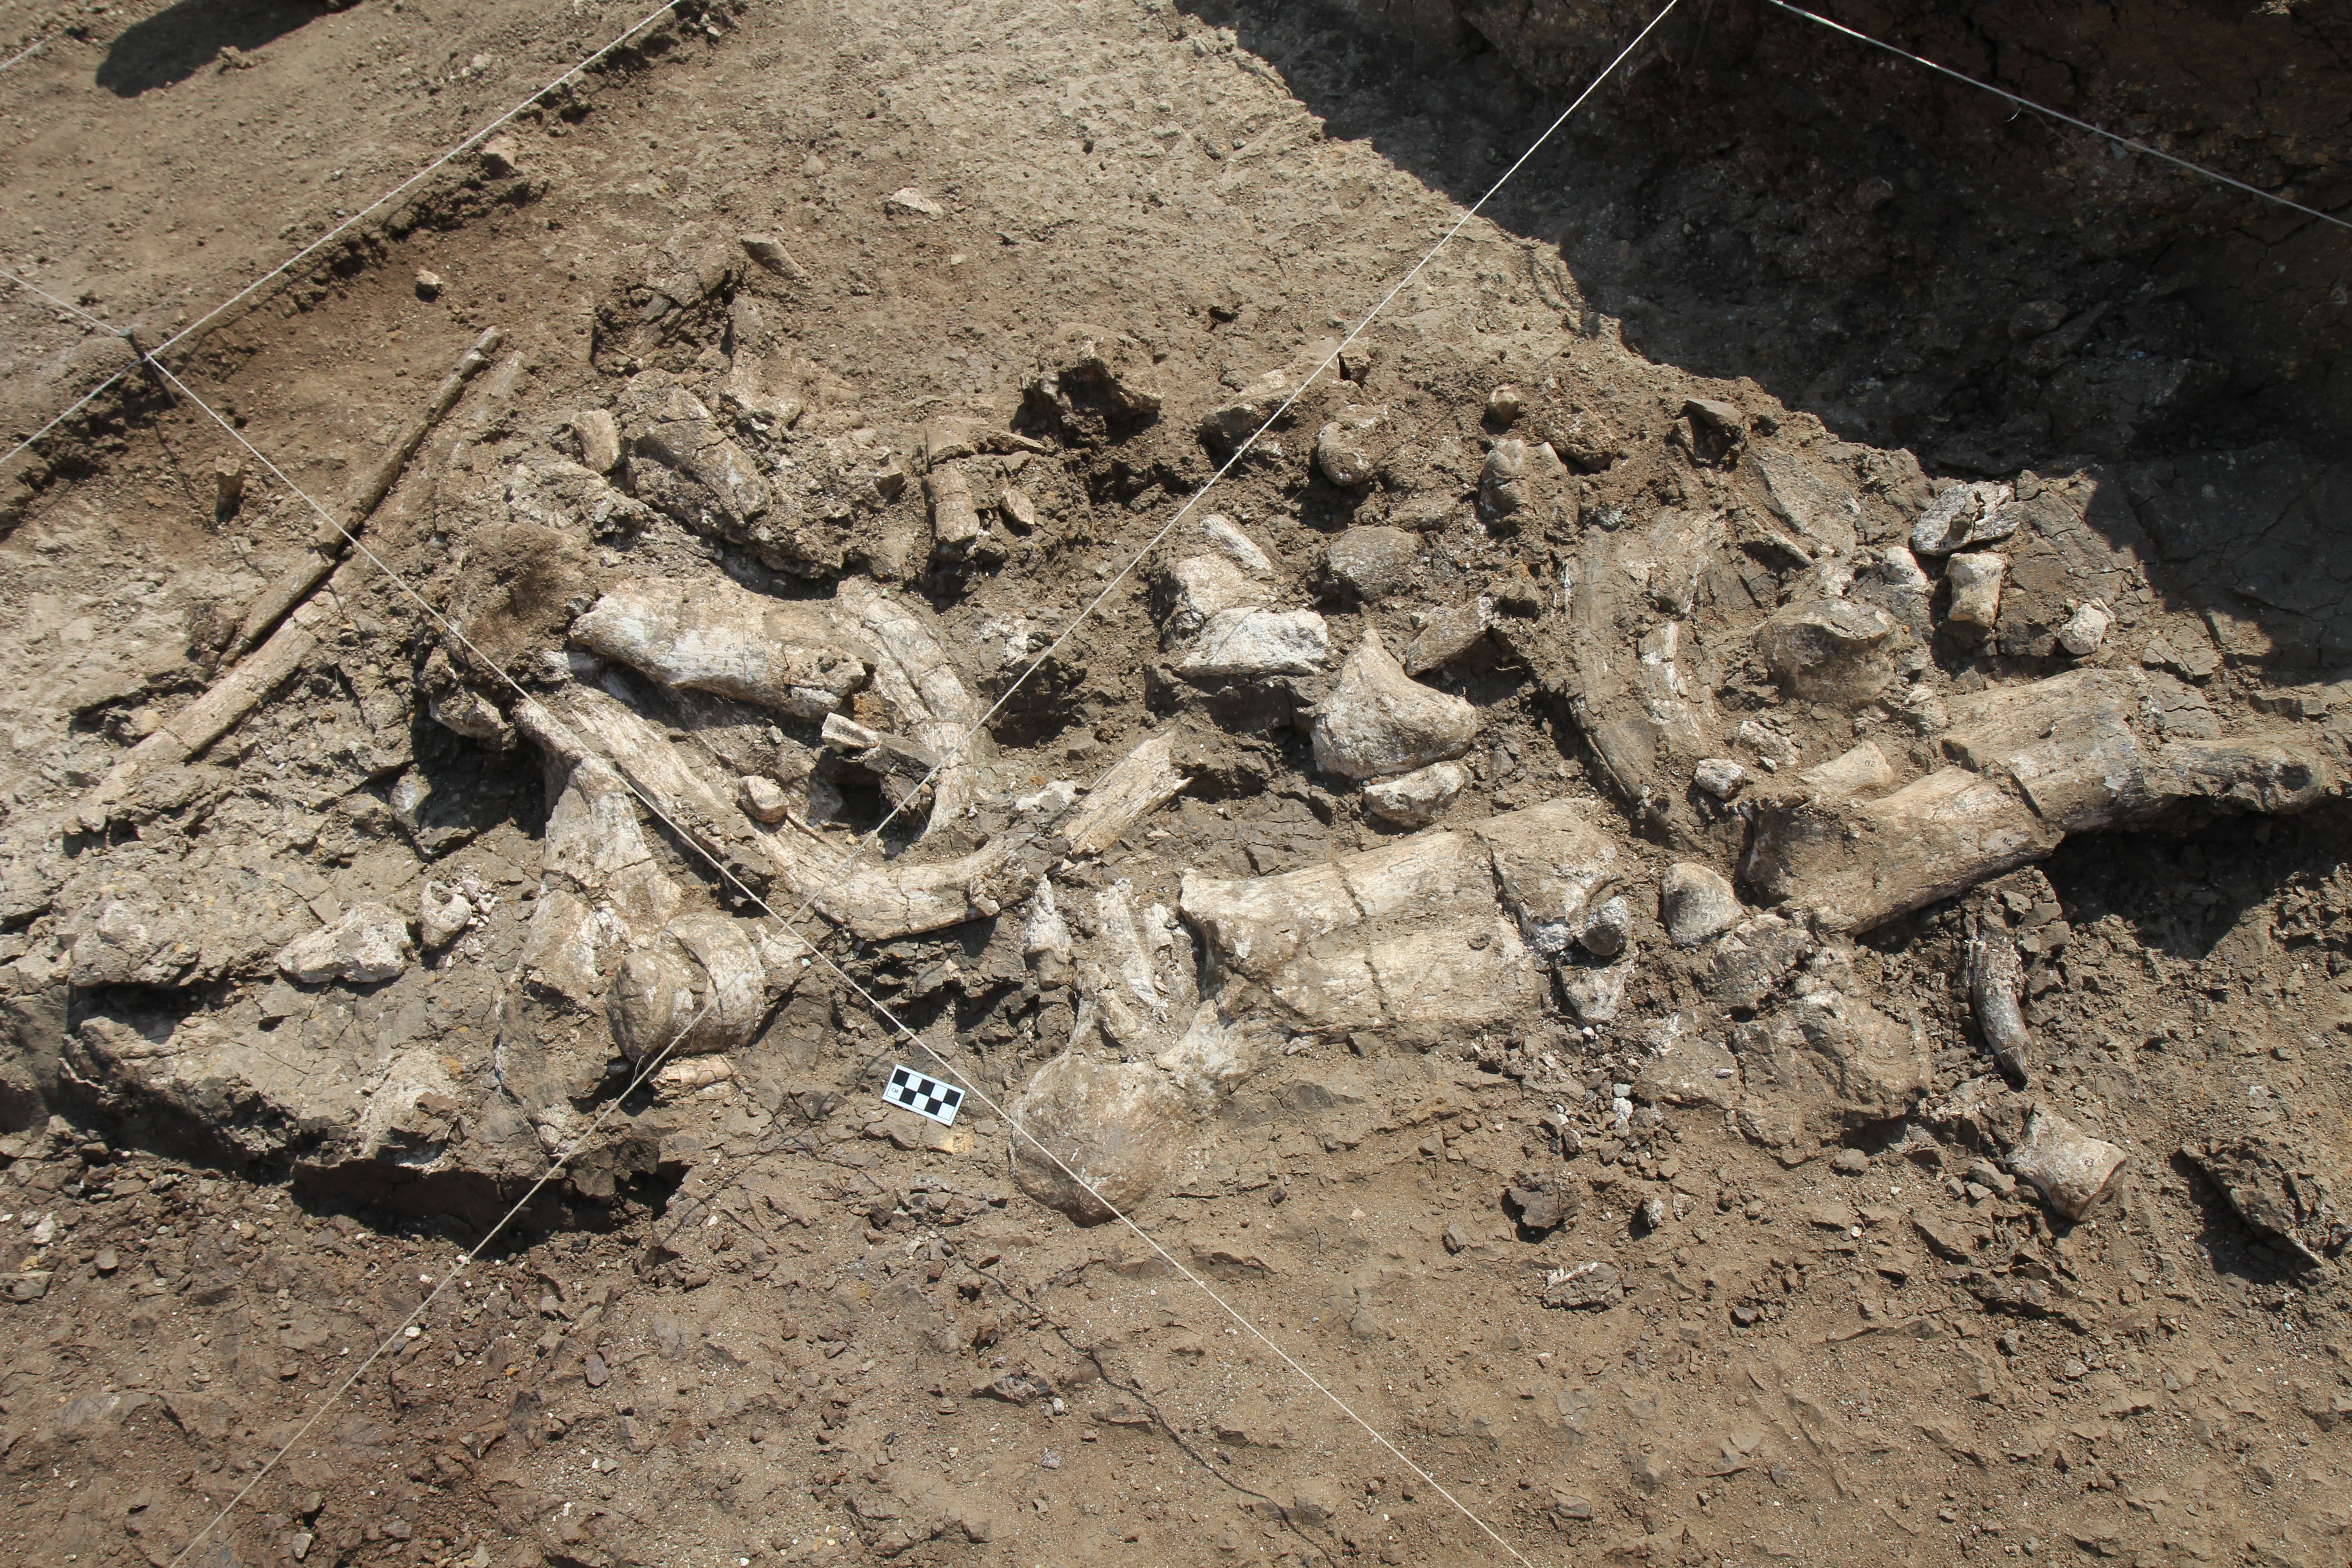 Fossil hippo skeleton and associated Oldowan artifacts at the Nyayanga site in July 2016. Credit: T.W. Plummer, Homa Peninsula Paleoanthropology Project